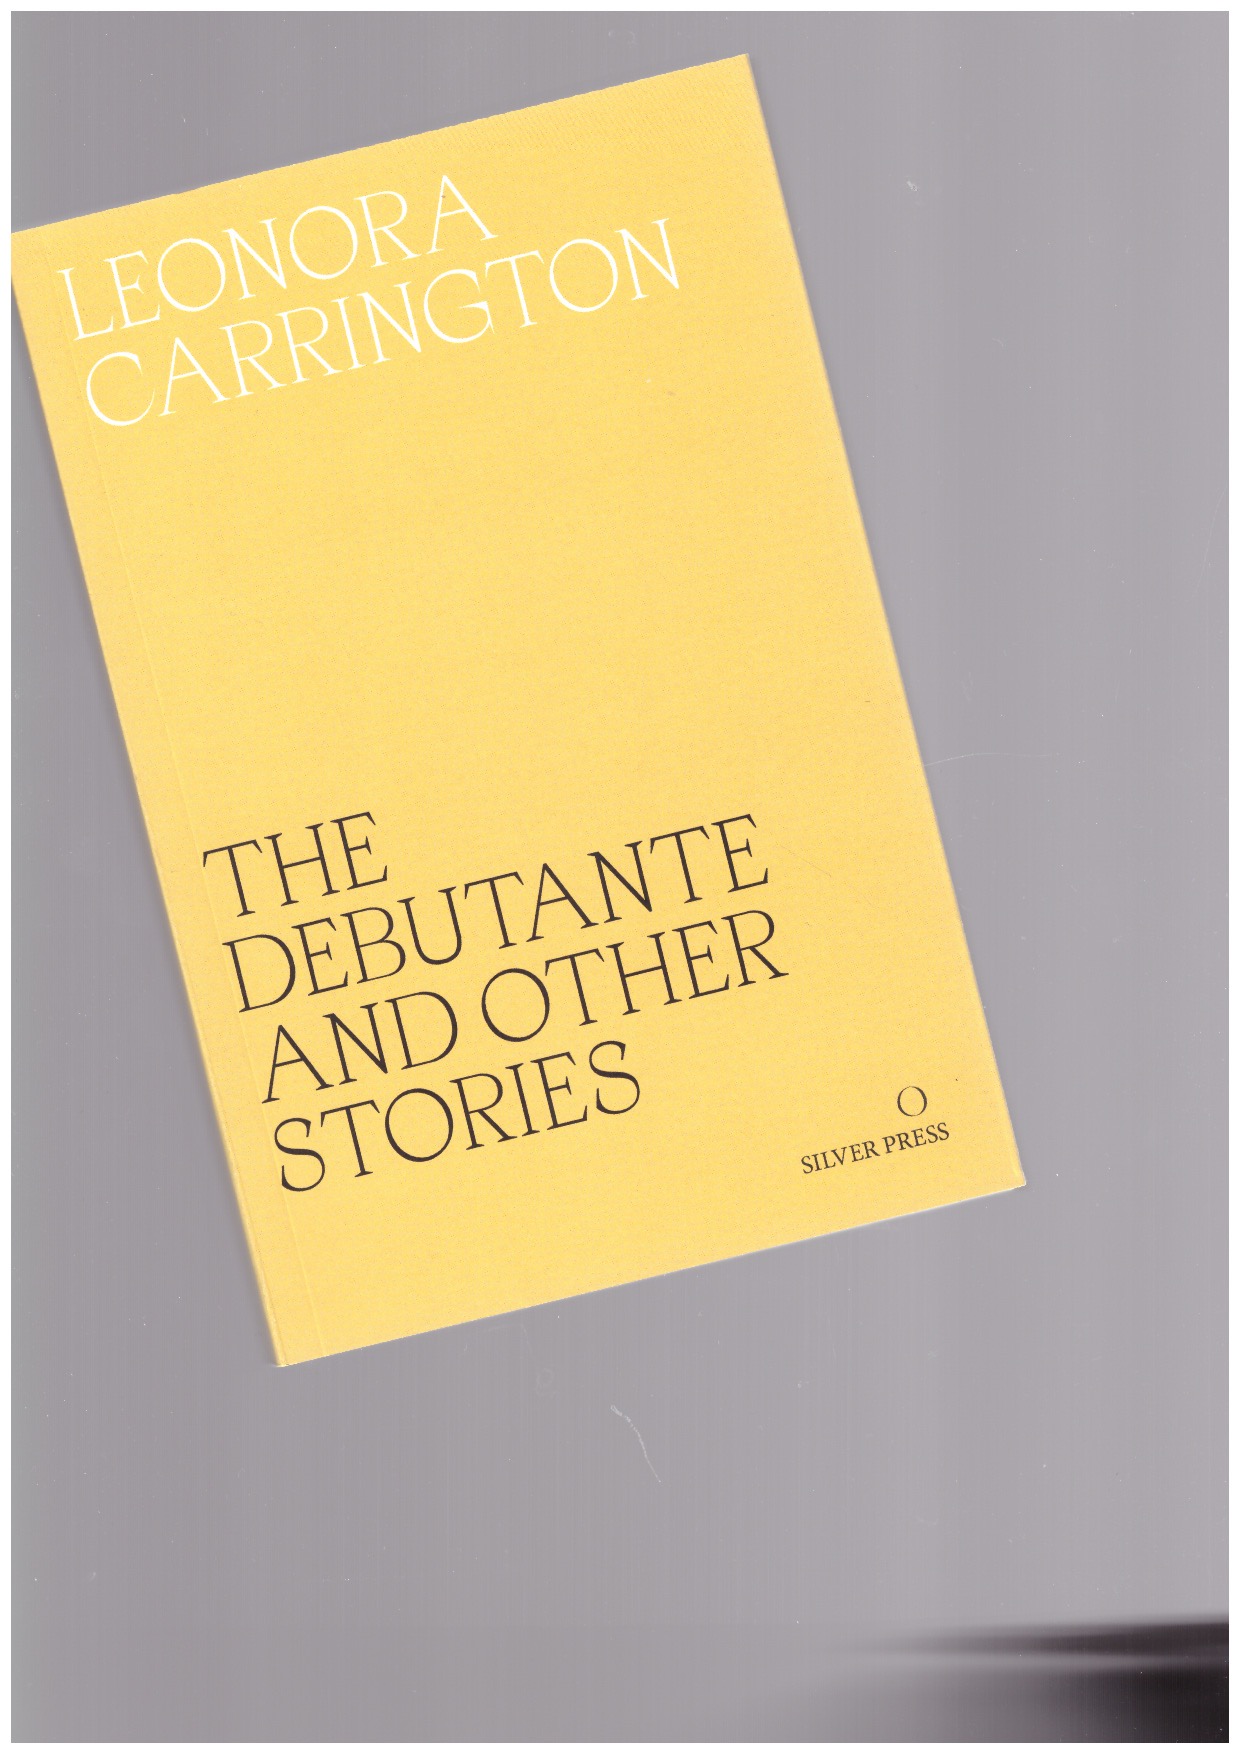 CARRINGTON, Leonora - The debutante and other stories